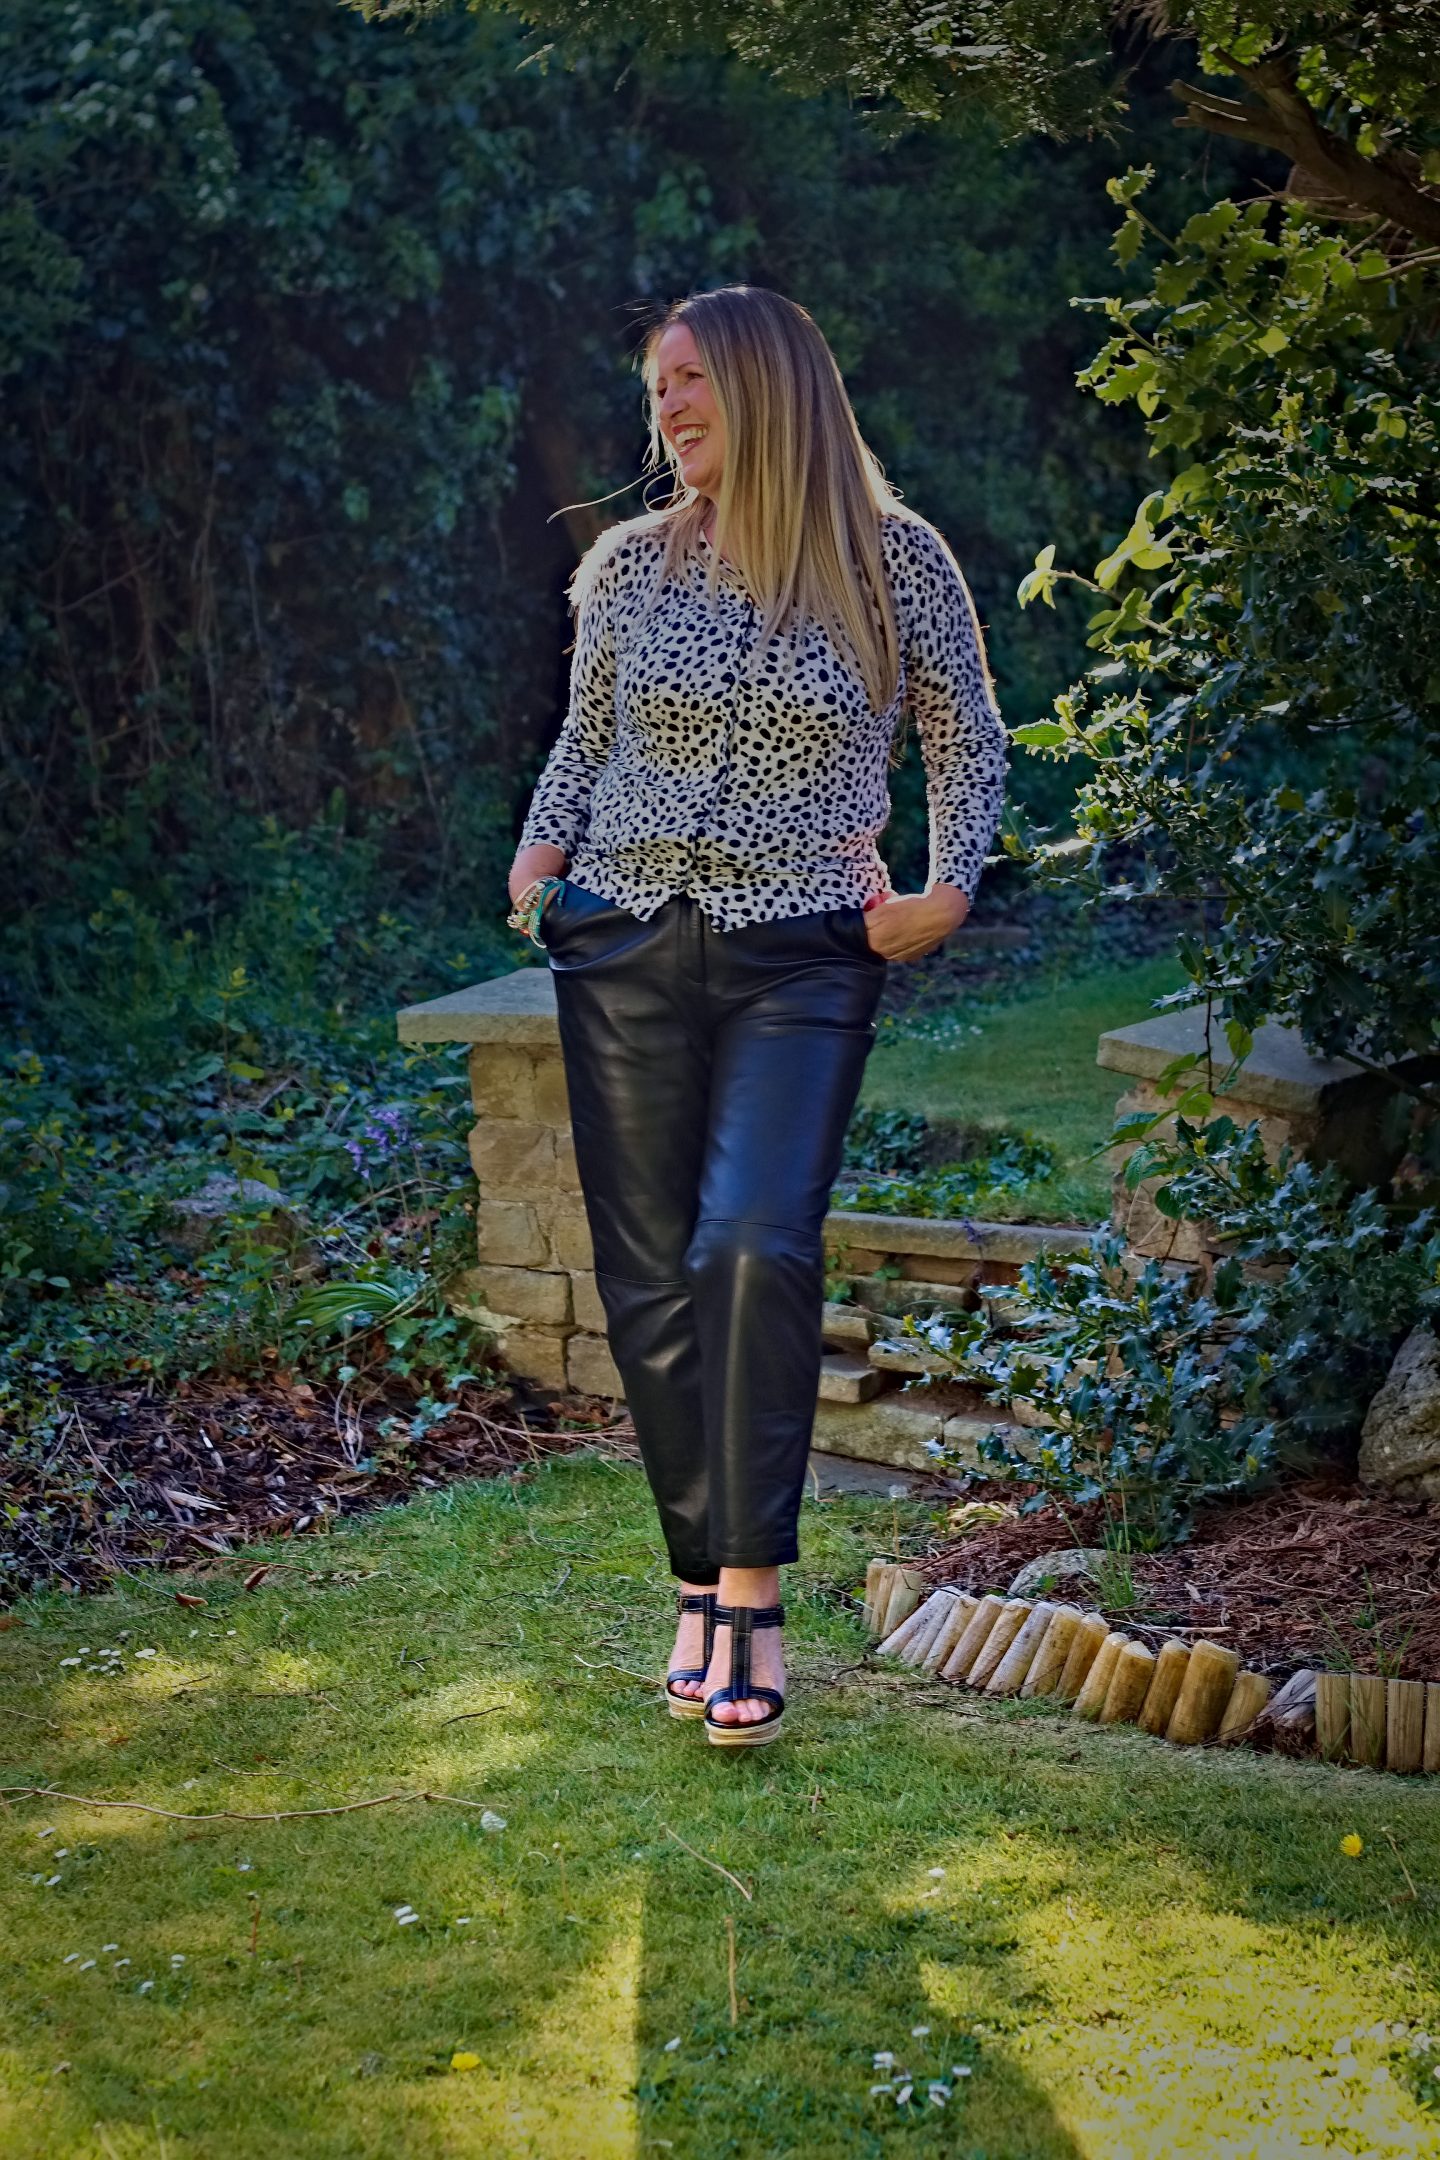 Leather Trousers, Why Not? - Midlife and Beyond